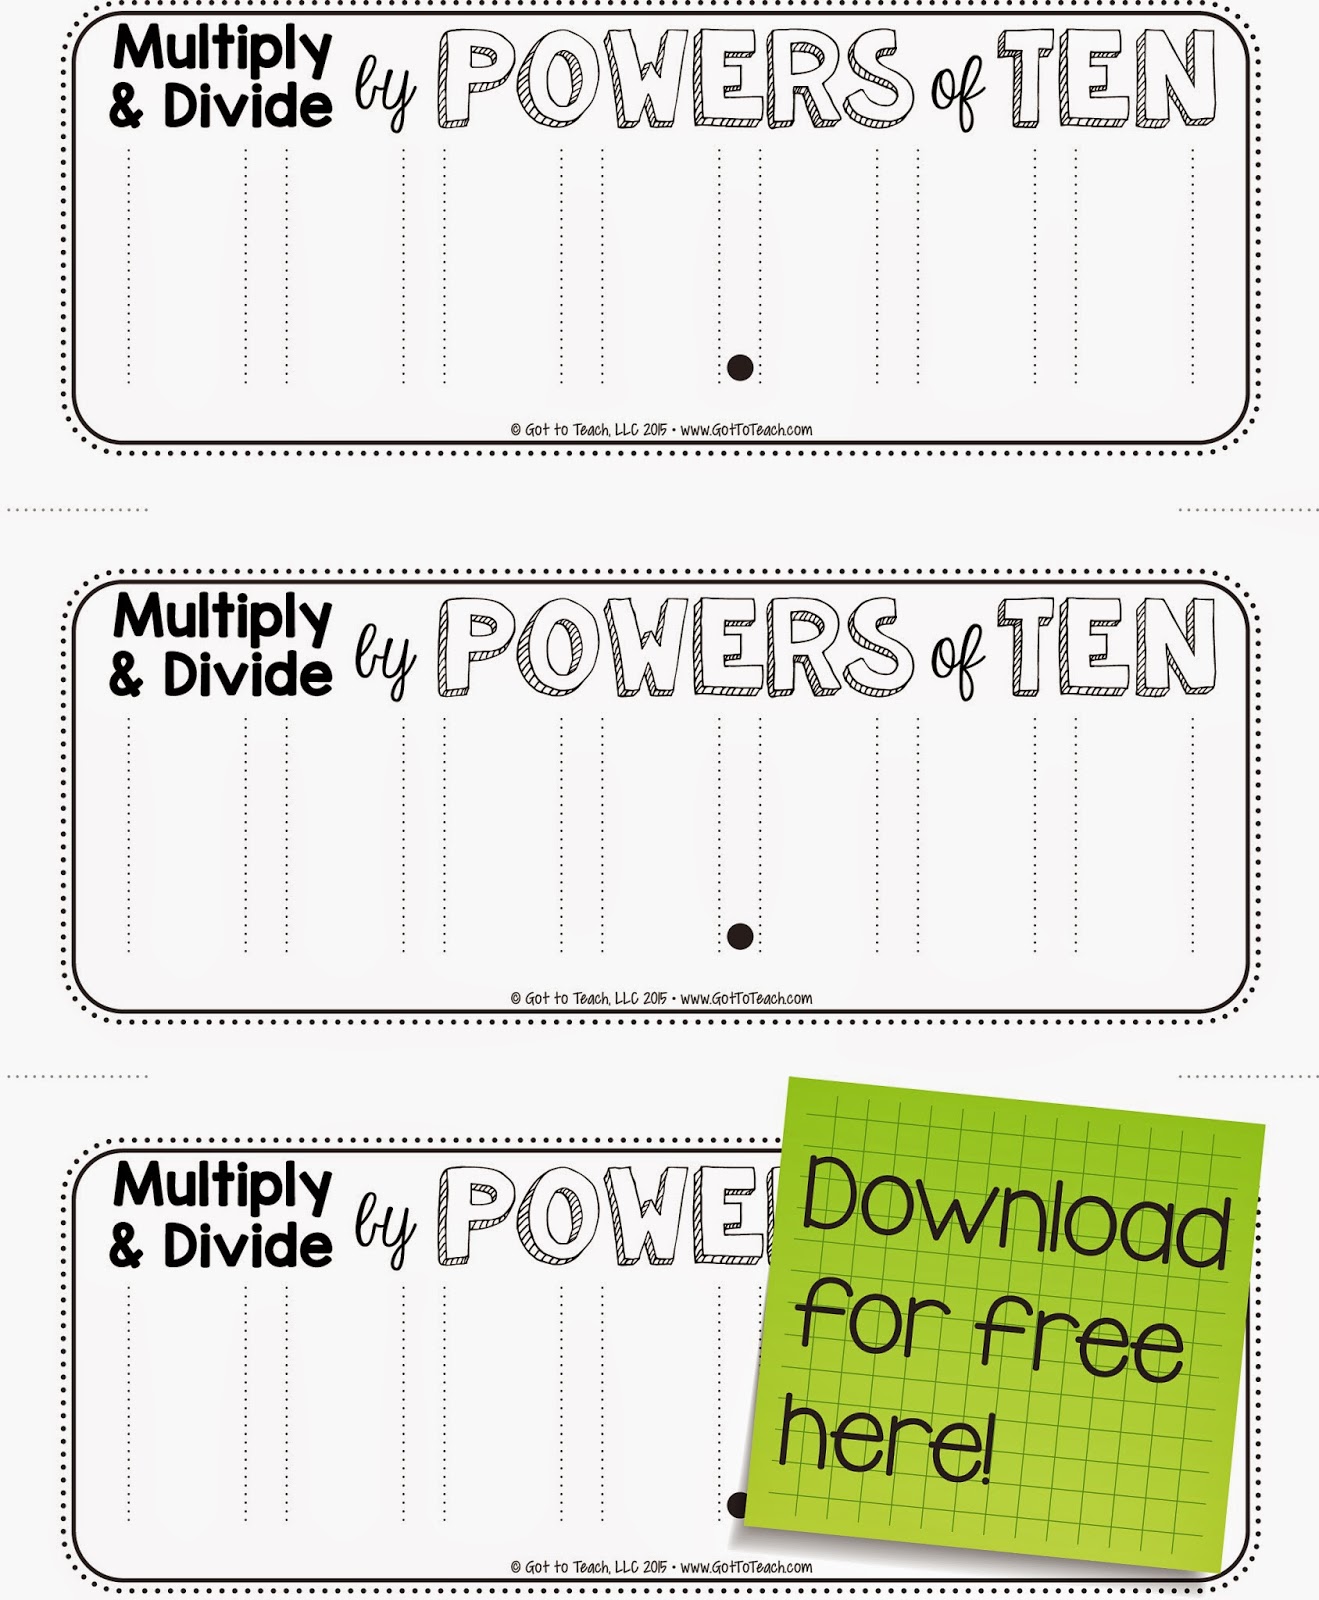 multiplying-whole-numbers-by-10-a-powers-of-ten-worksheet